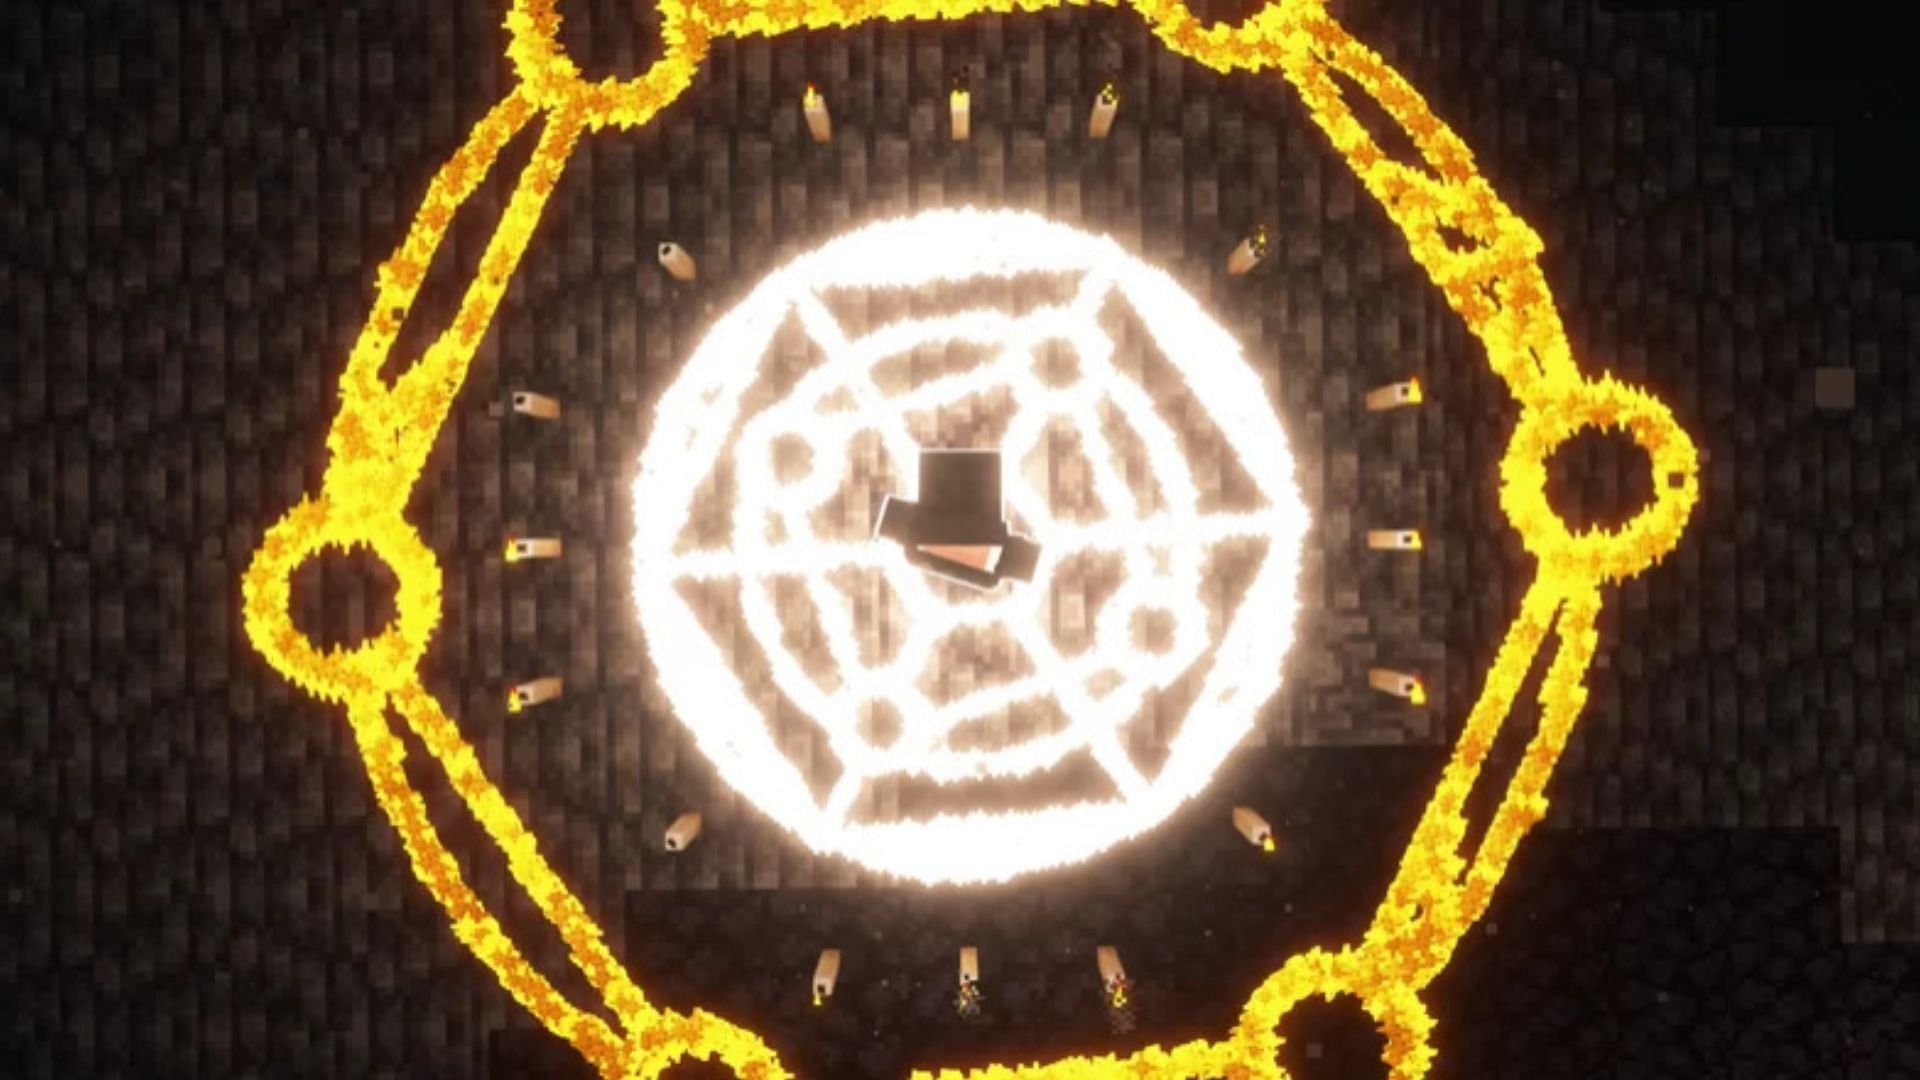 The yellow energy circle is made using a soul bottle (Image via planetminecraft.com/Flubberschnub)